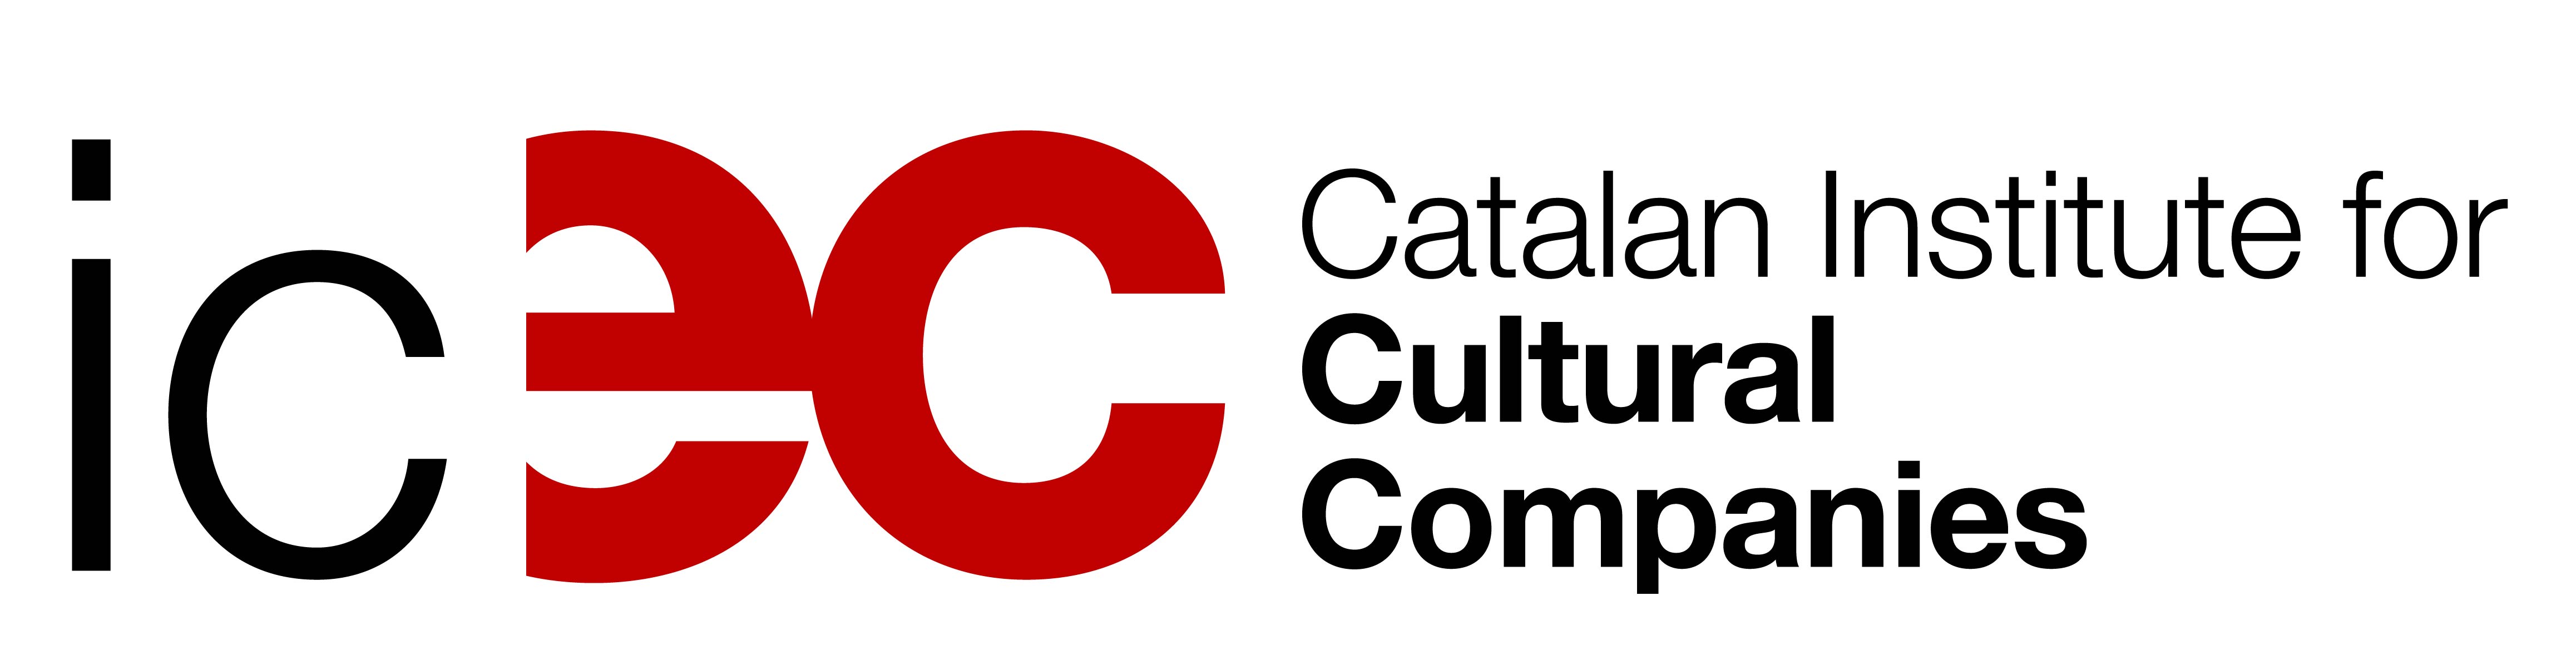 Catalan Institute for Cultural Companies